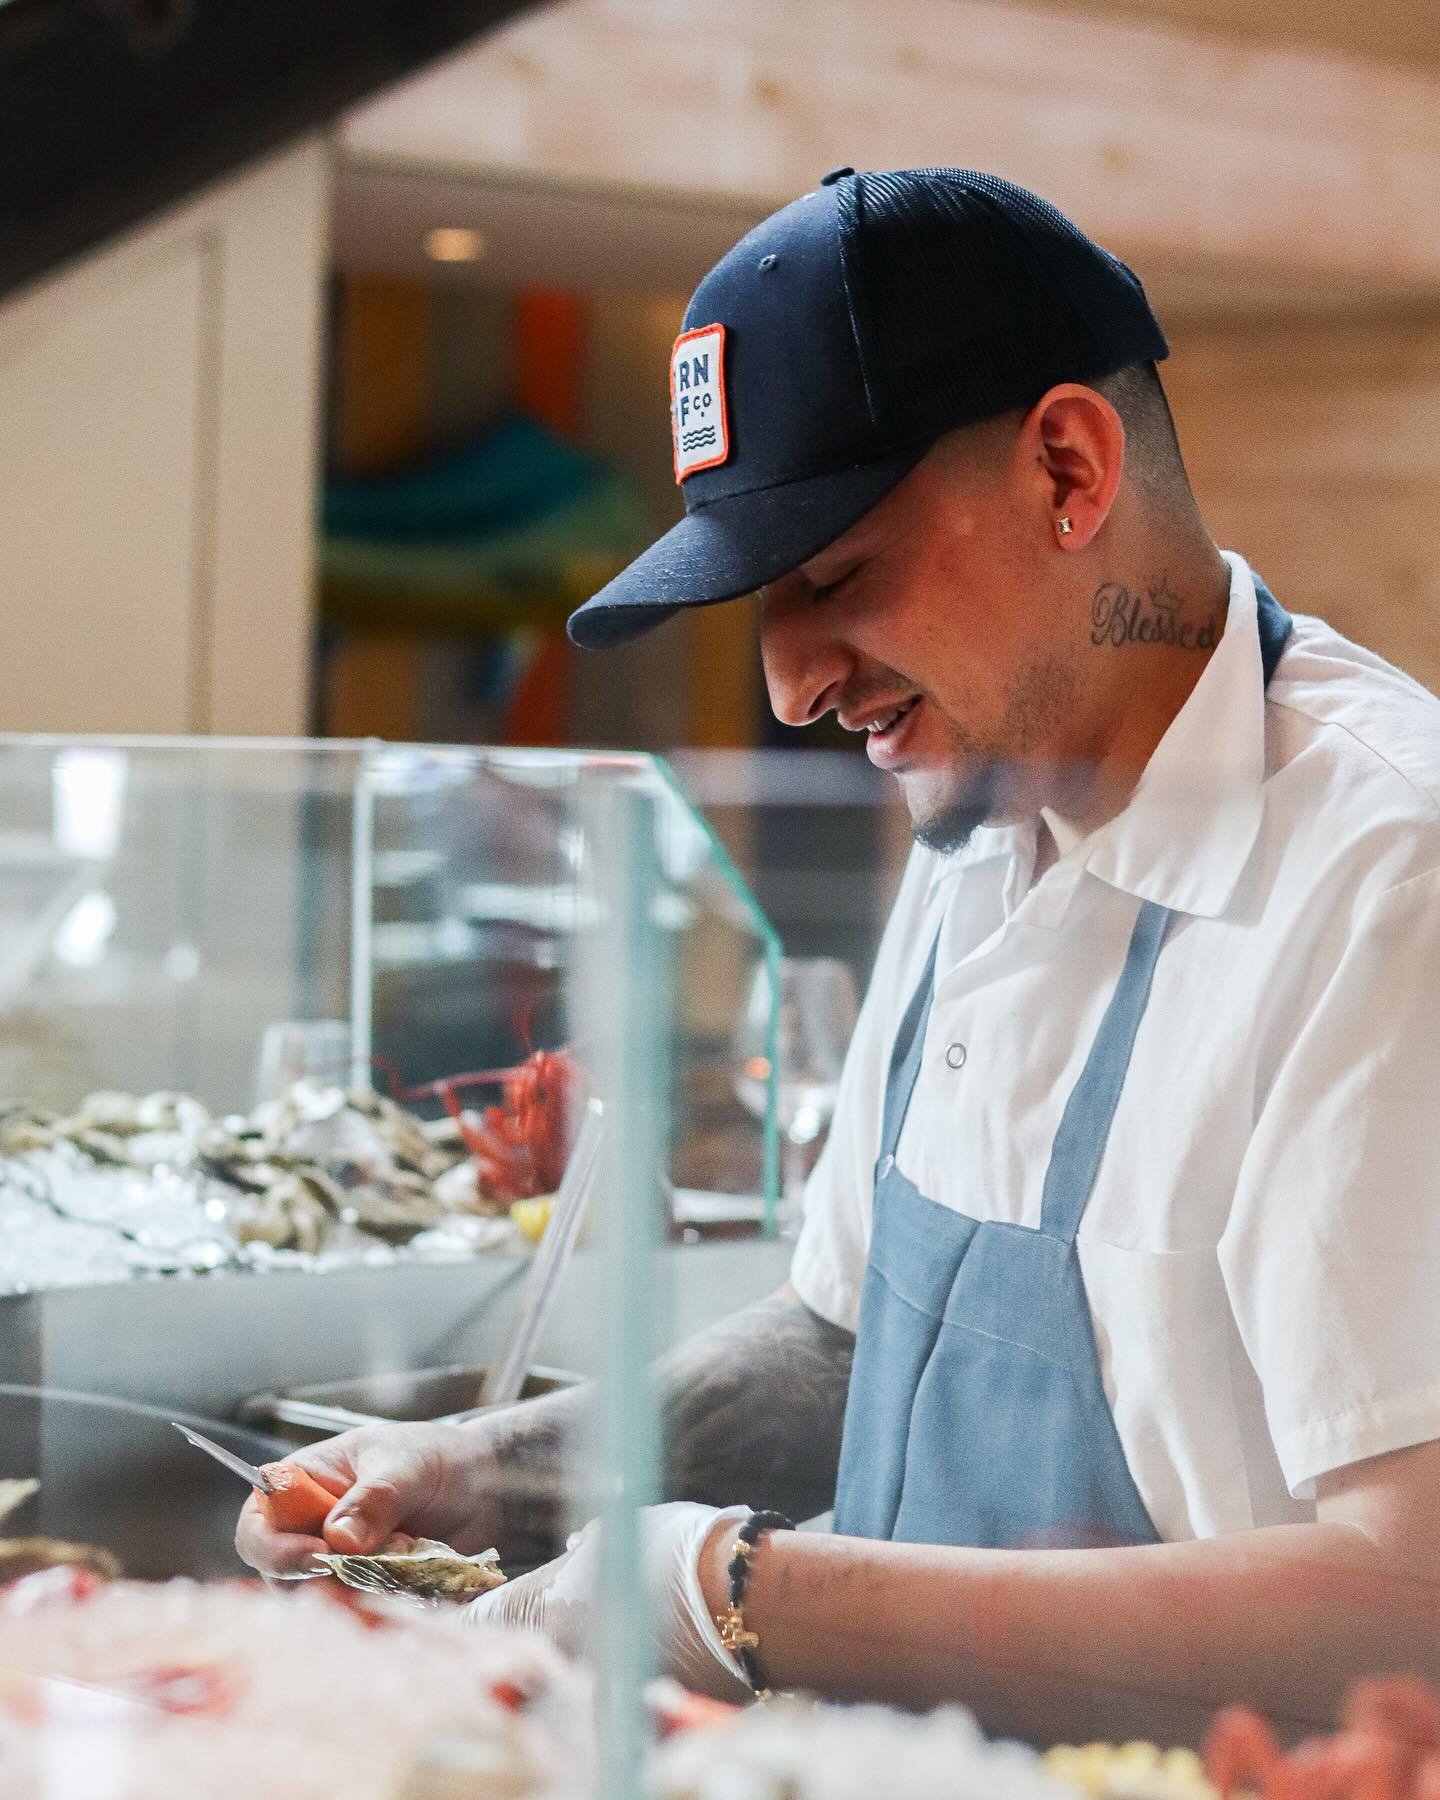 Celebrate National Shrimp day with us. Fresh from the sea to your plate, our raw bar selections are all about authentic unbeatable freshness - come taste the difference! 🦐 

#RawBar #NewEnglandSeafood #Seafood #Shrimp